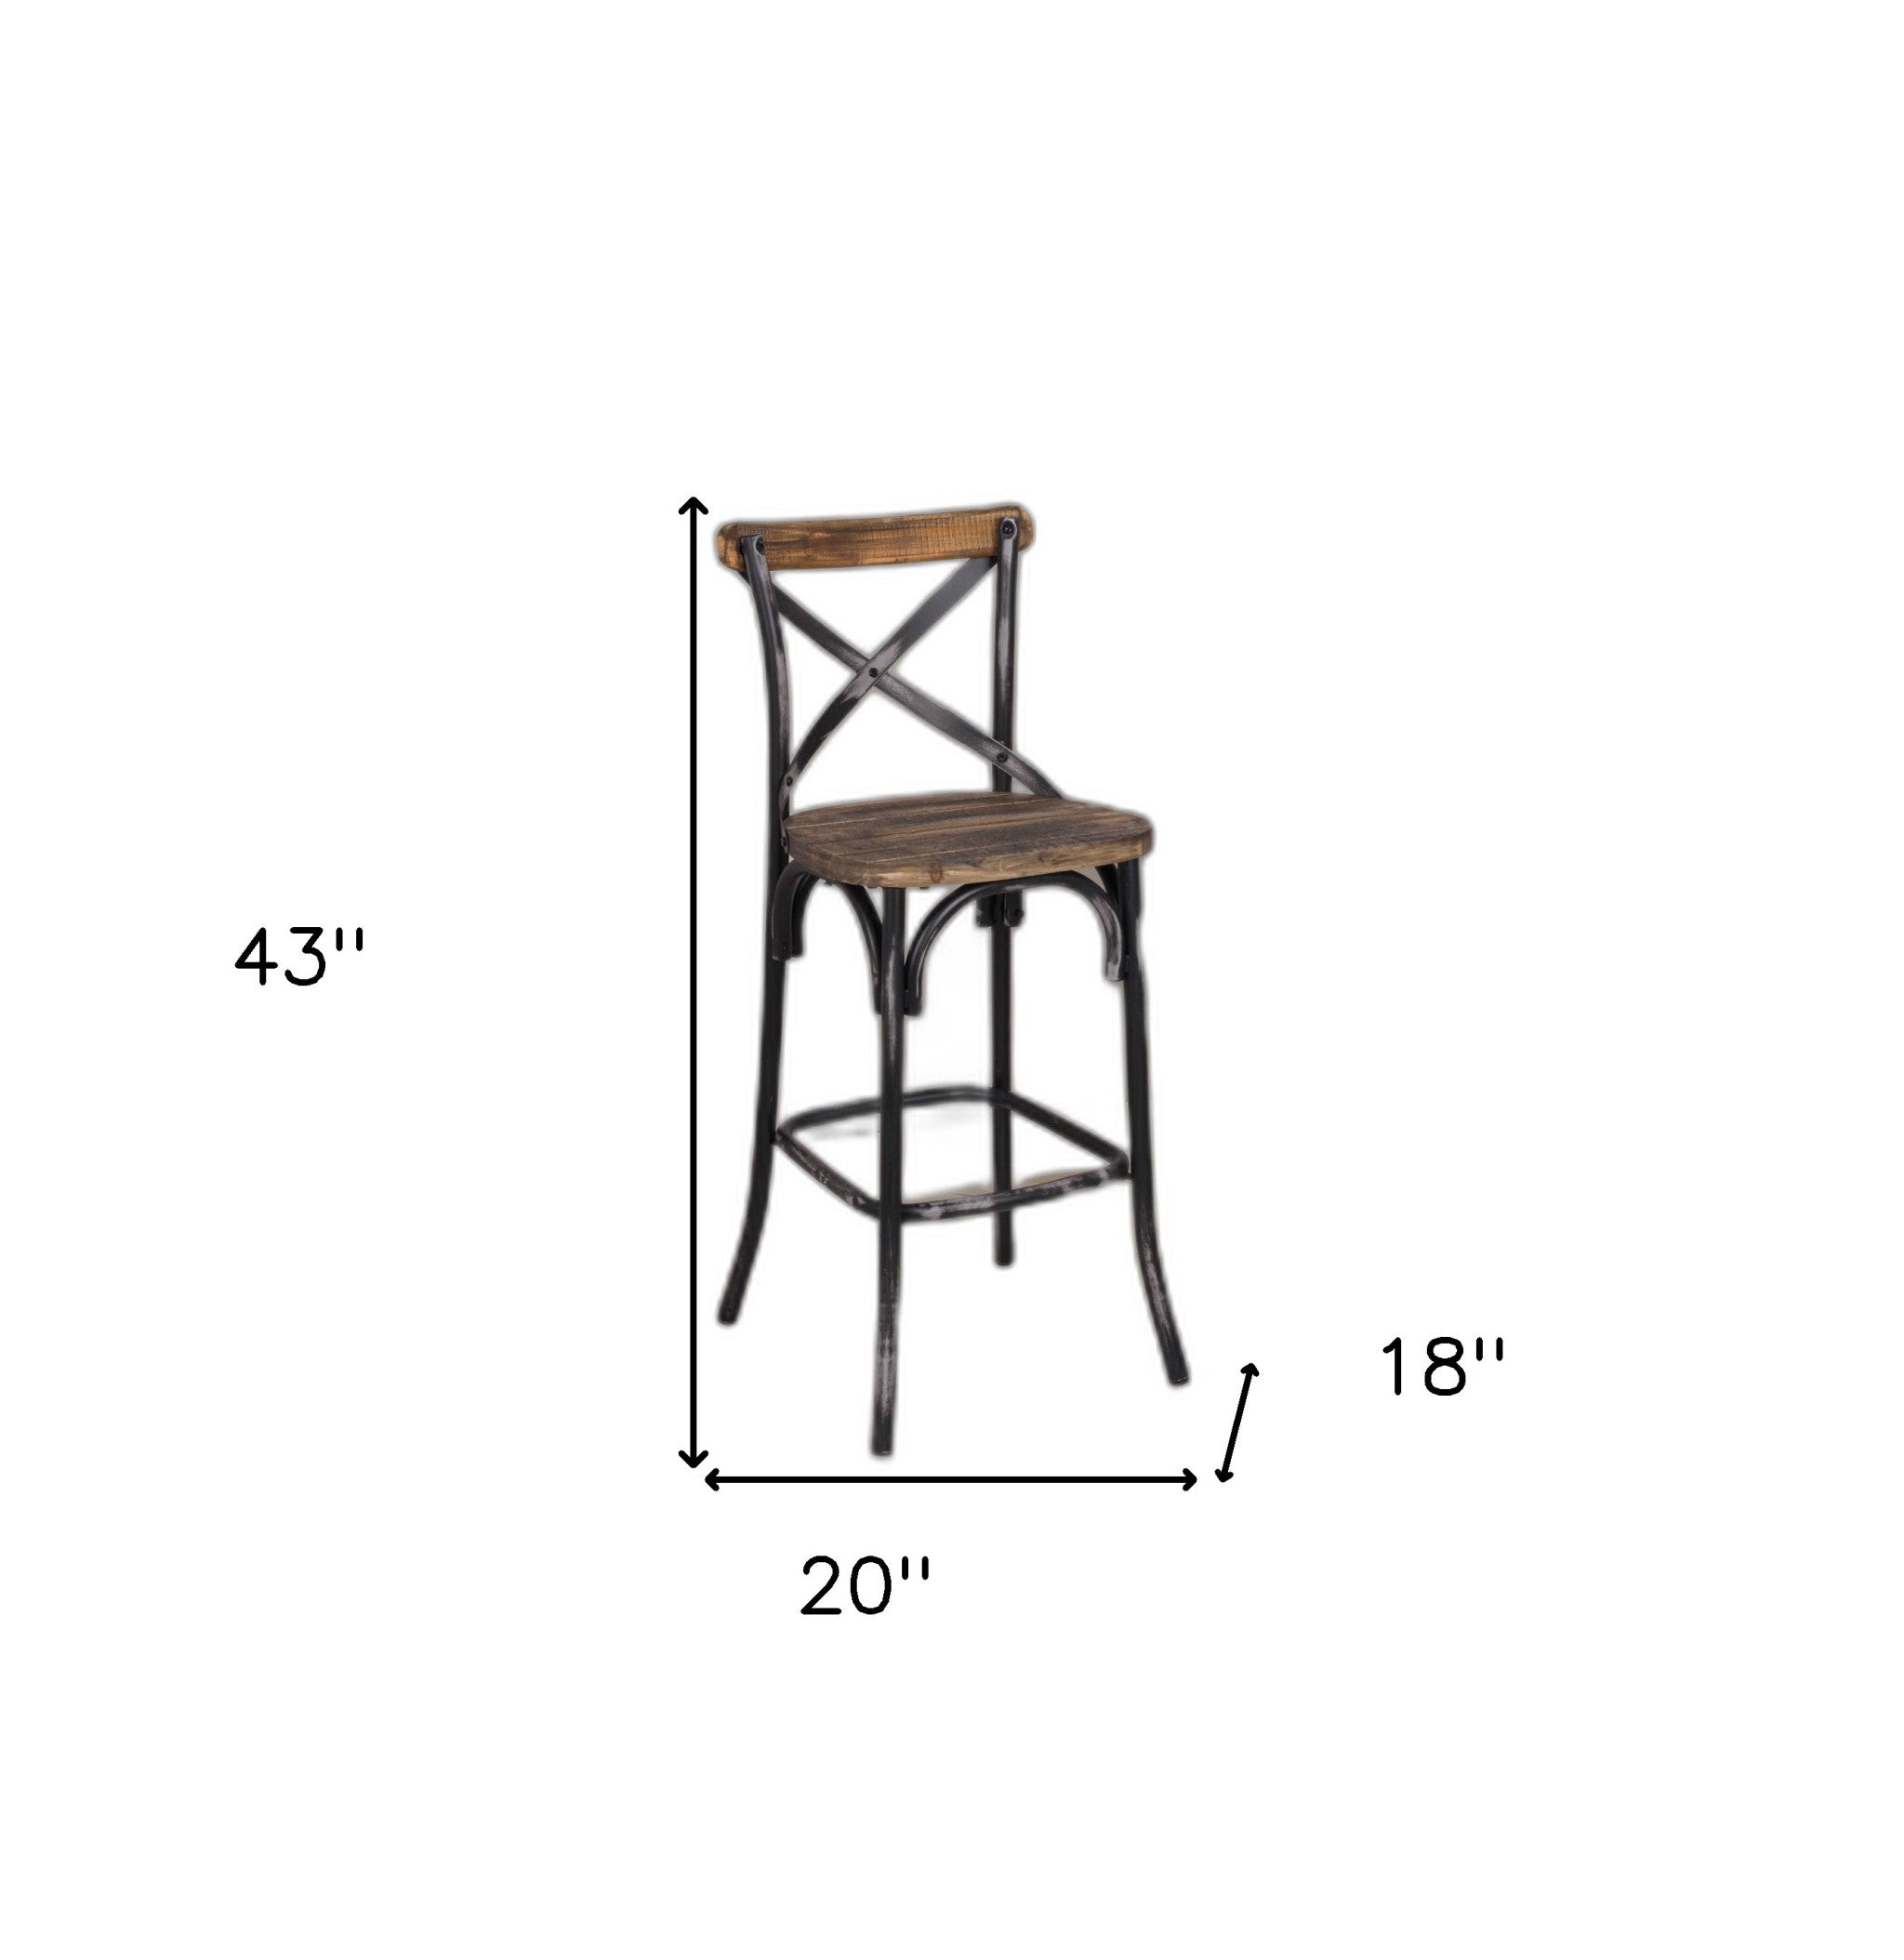 22" Brown And Black Iron Bar Chair